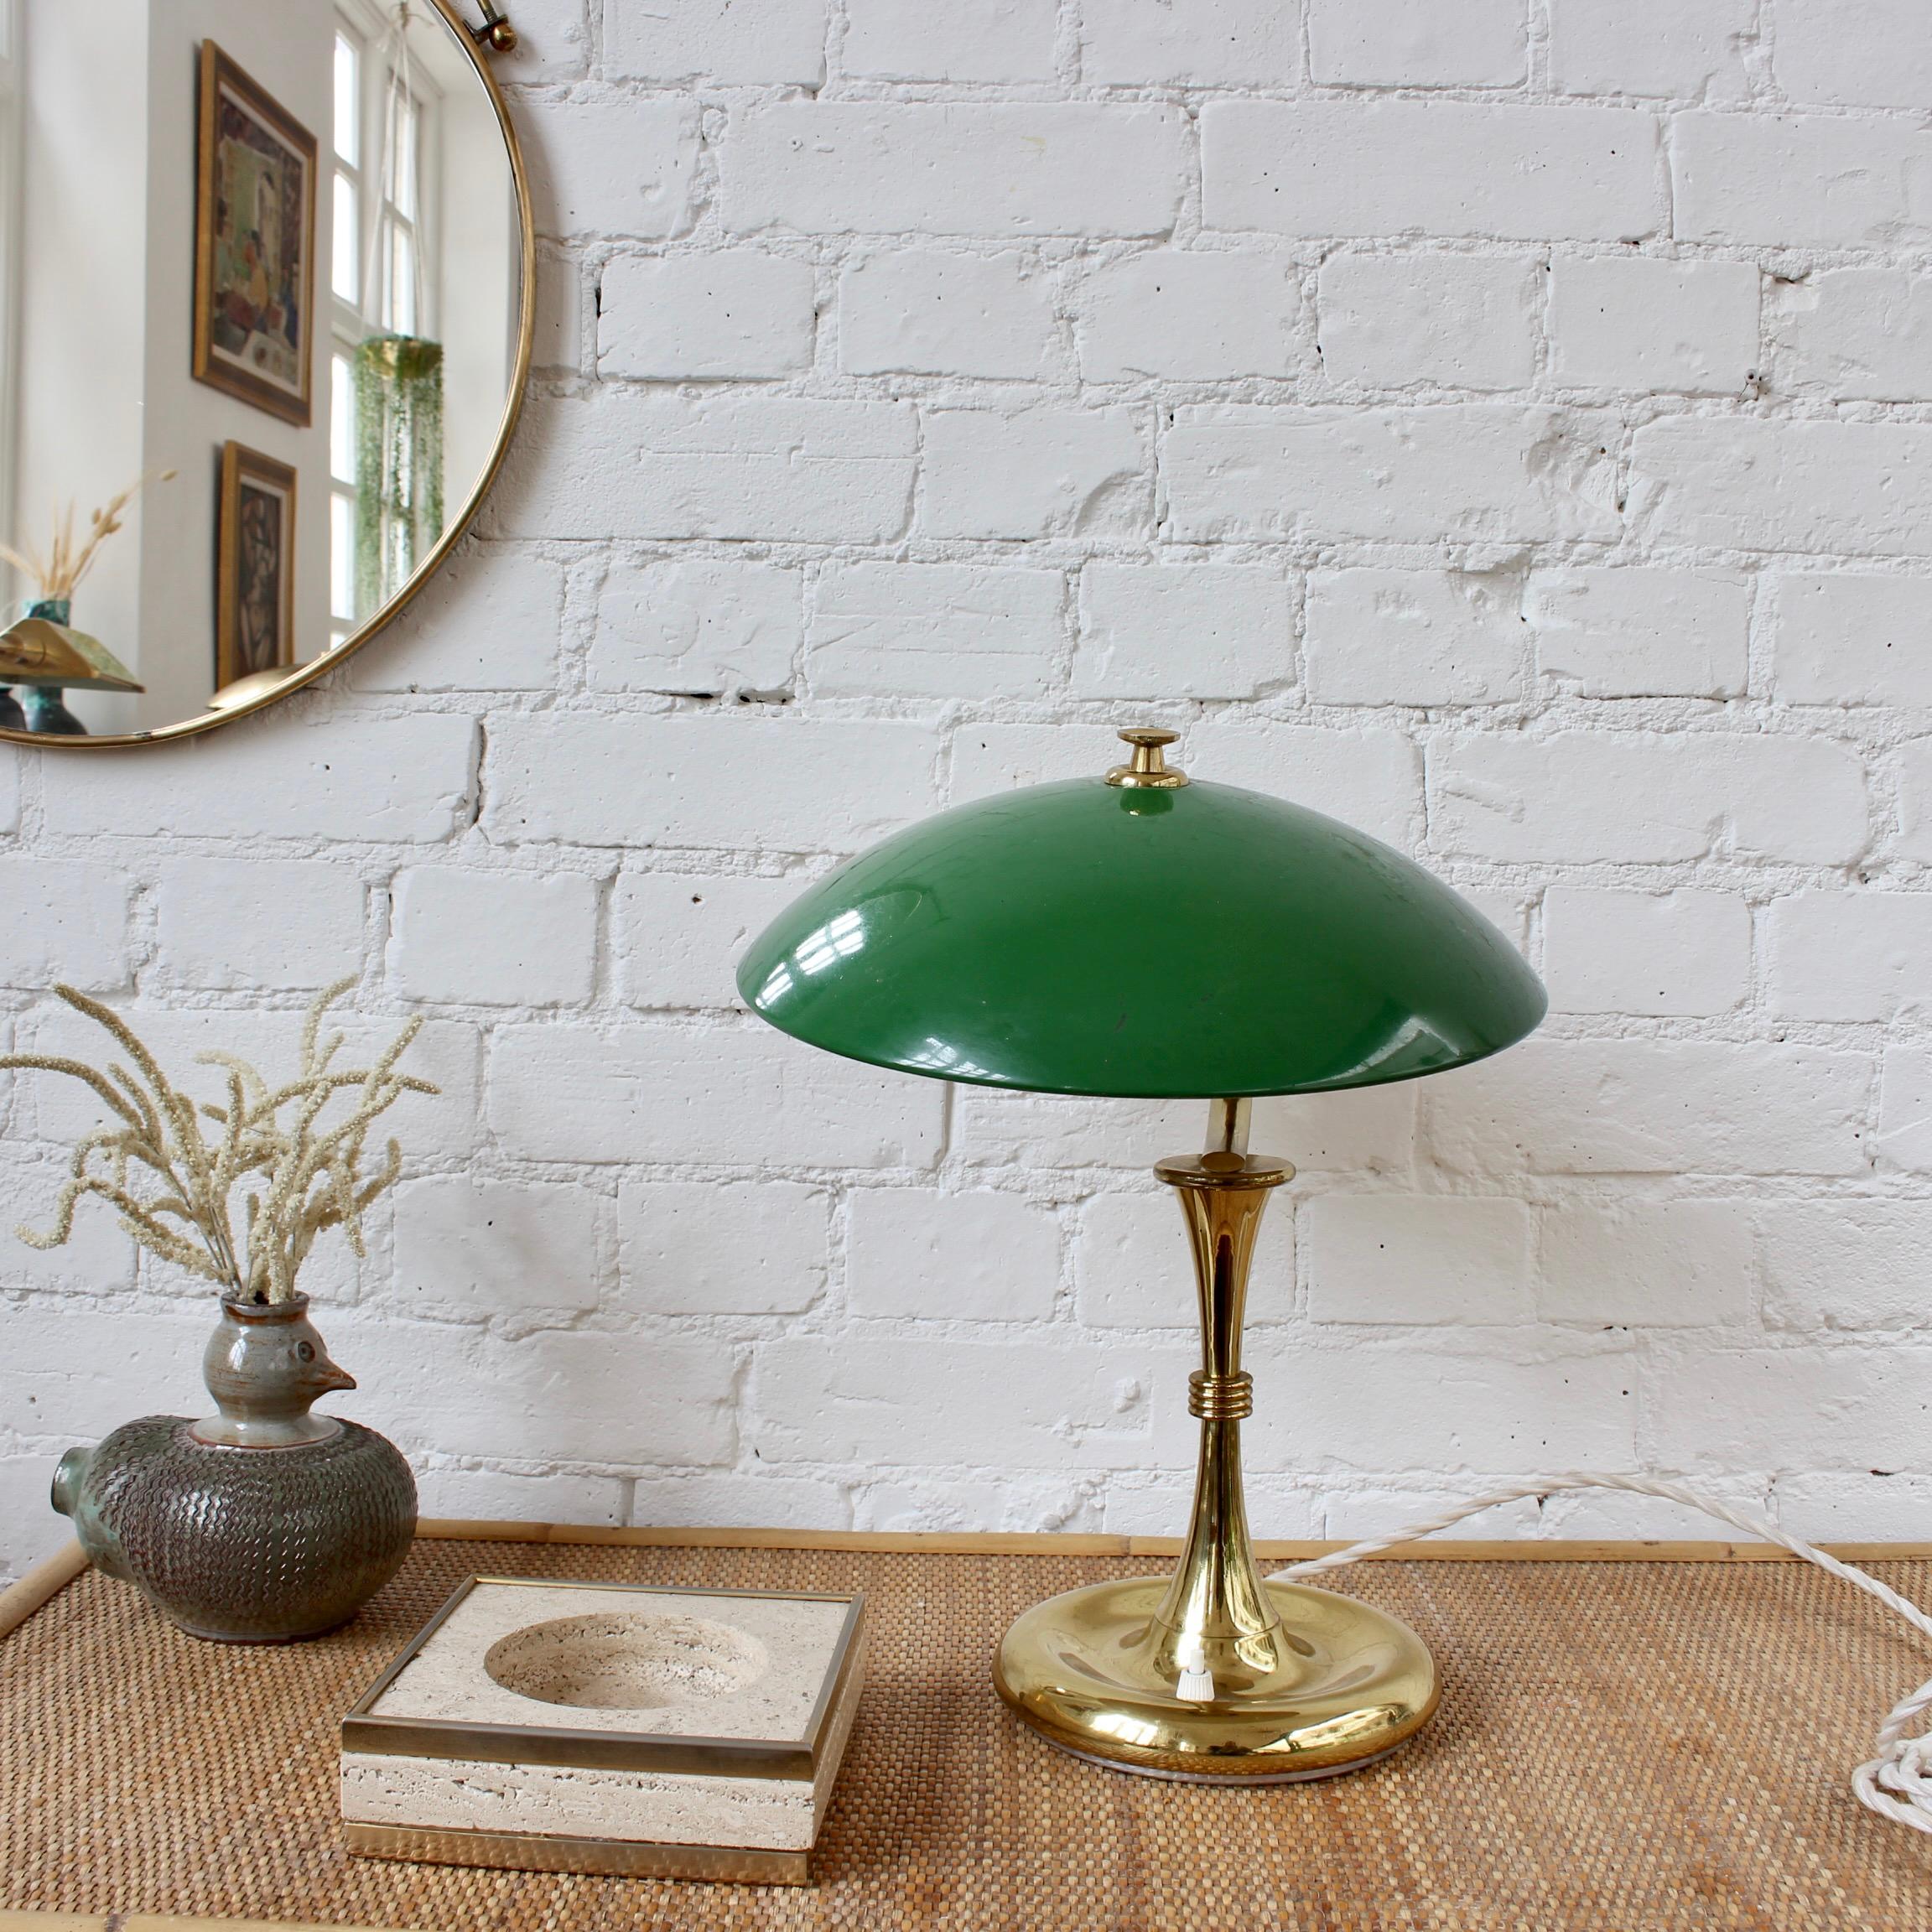 Italian Mid-Century Brass-Covered Desk Lamp with Green Shade 'circa 1950s' For Sale 1